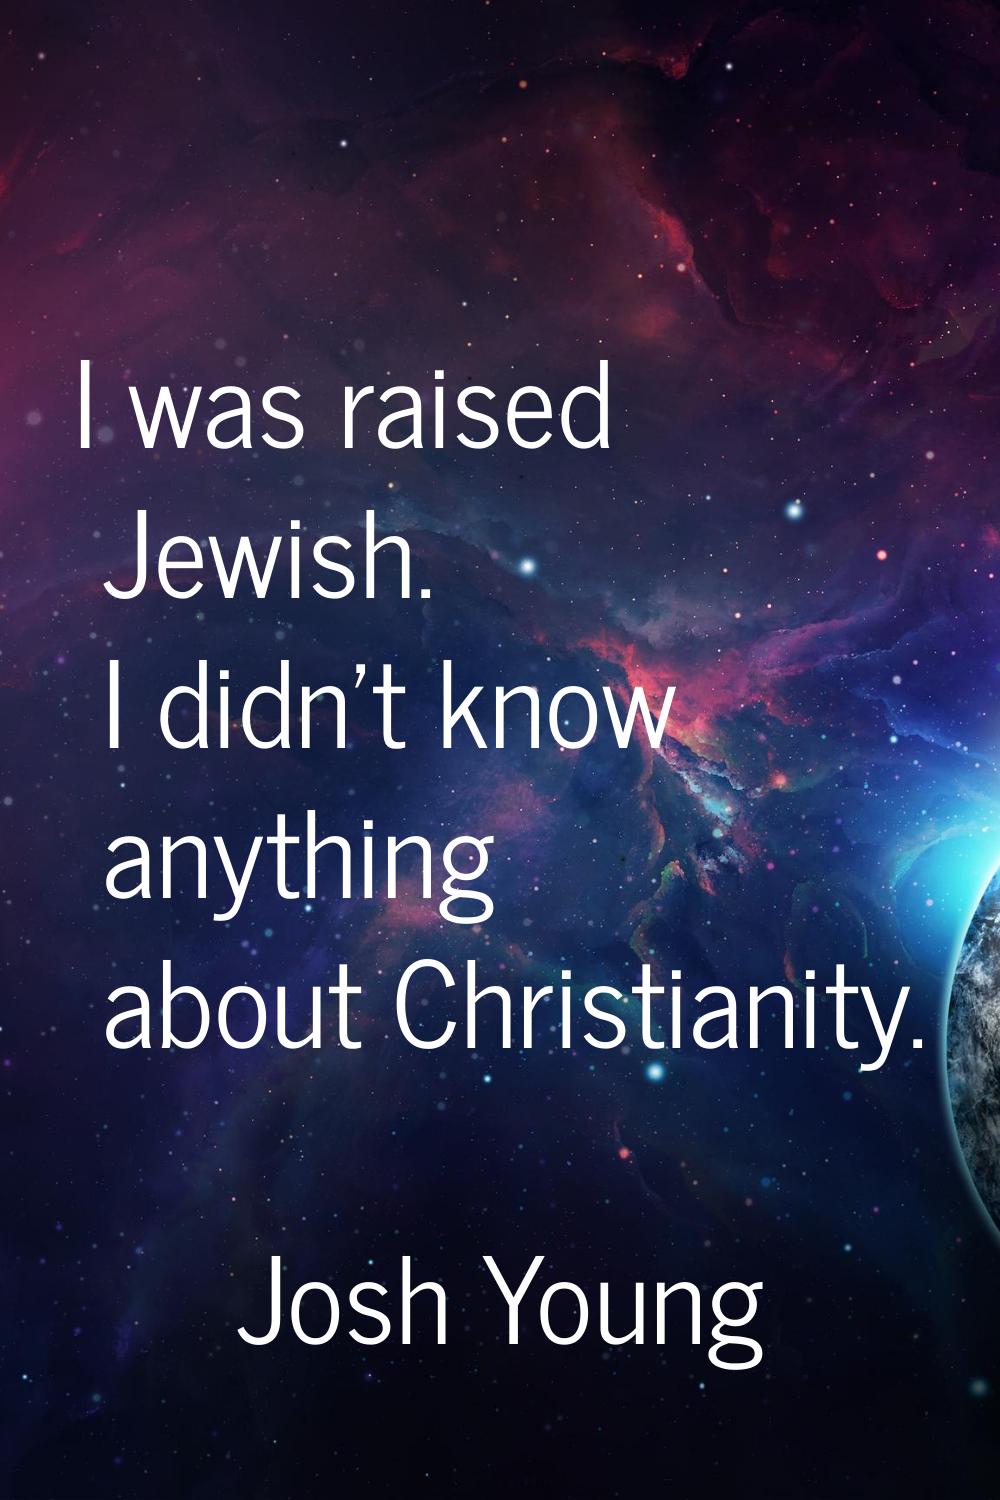 I was raised Jewish. I didn't know anything about Christianity.